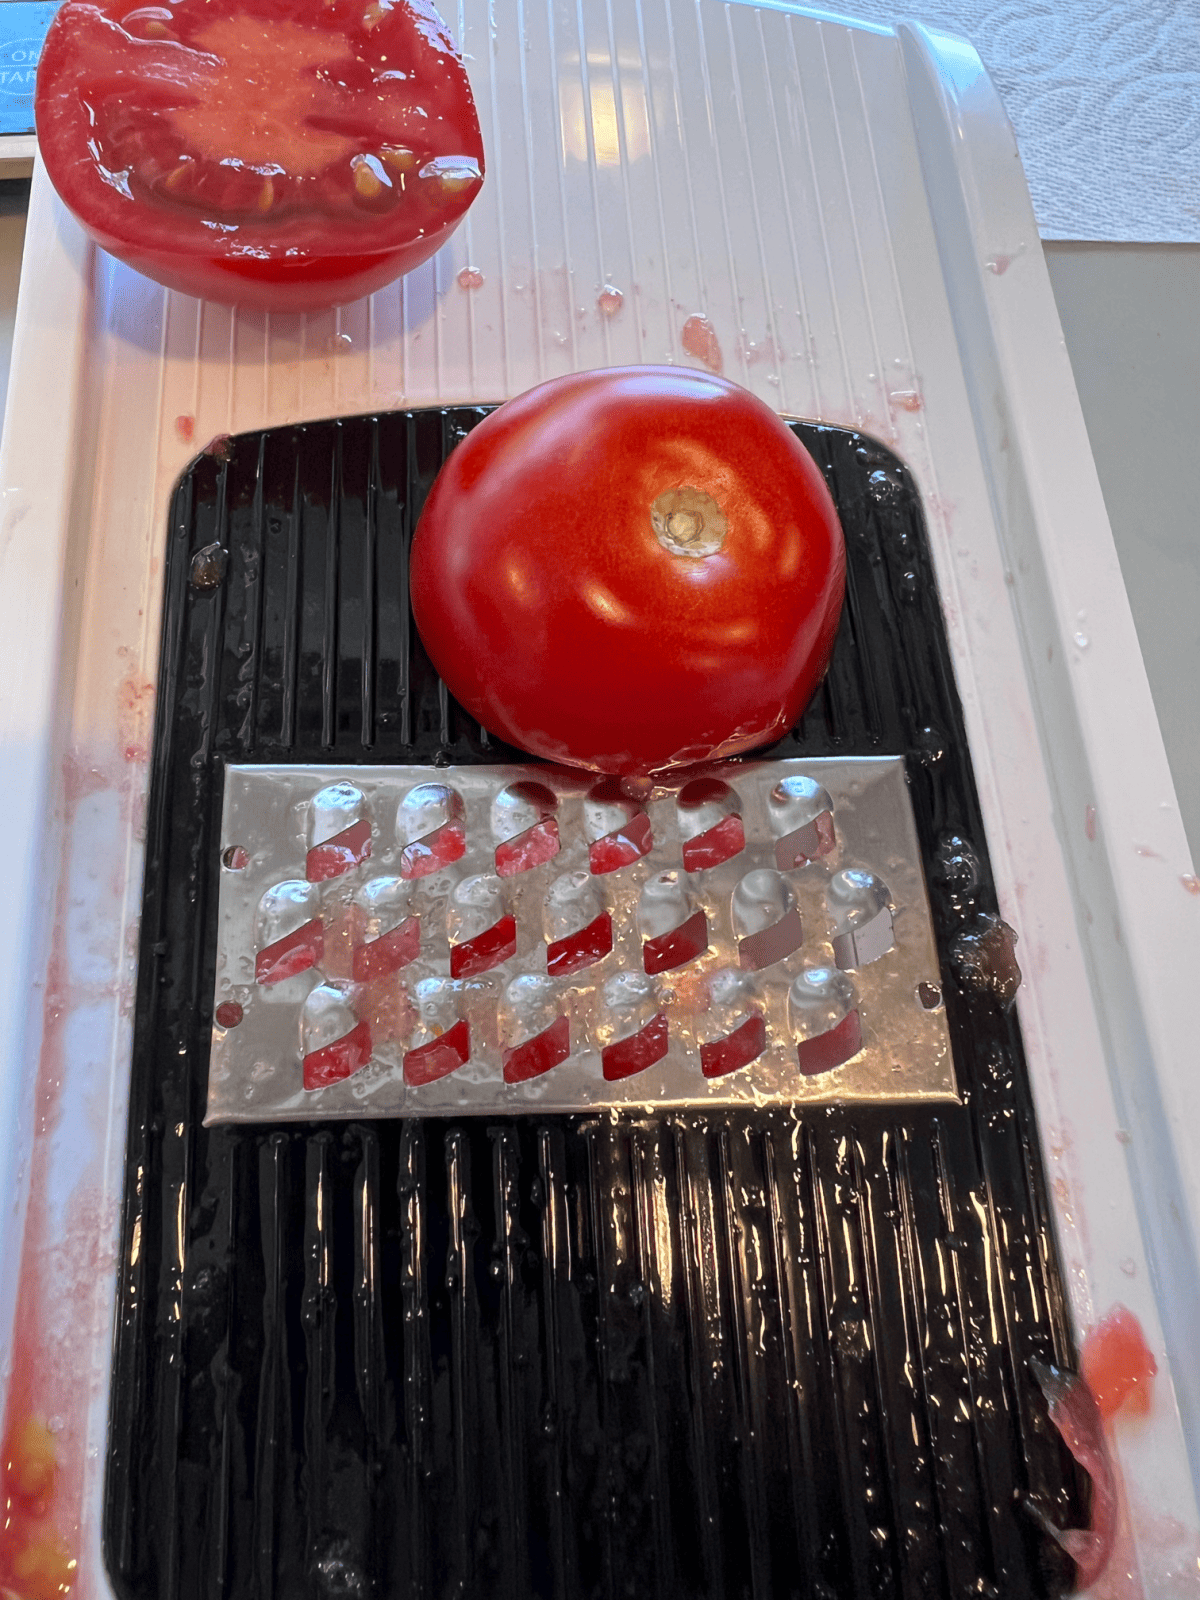 Grating tomatoes